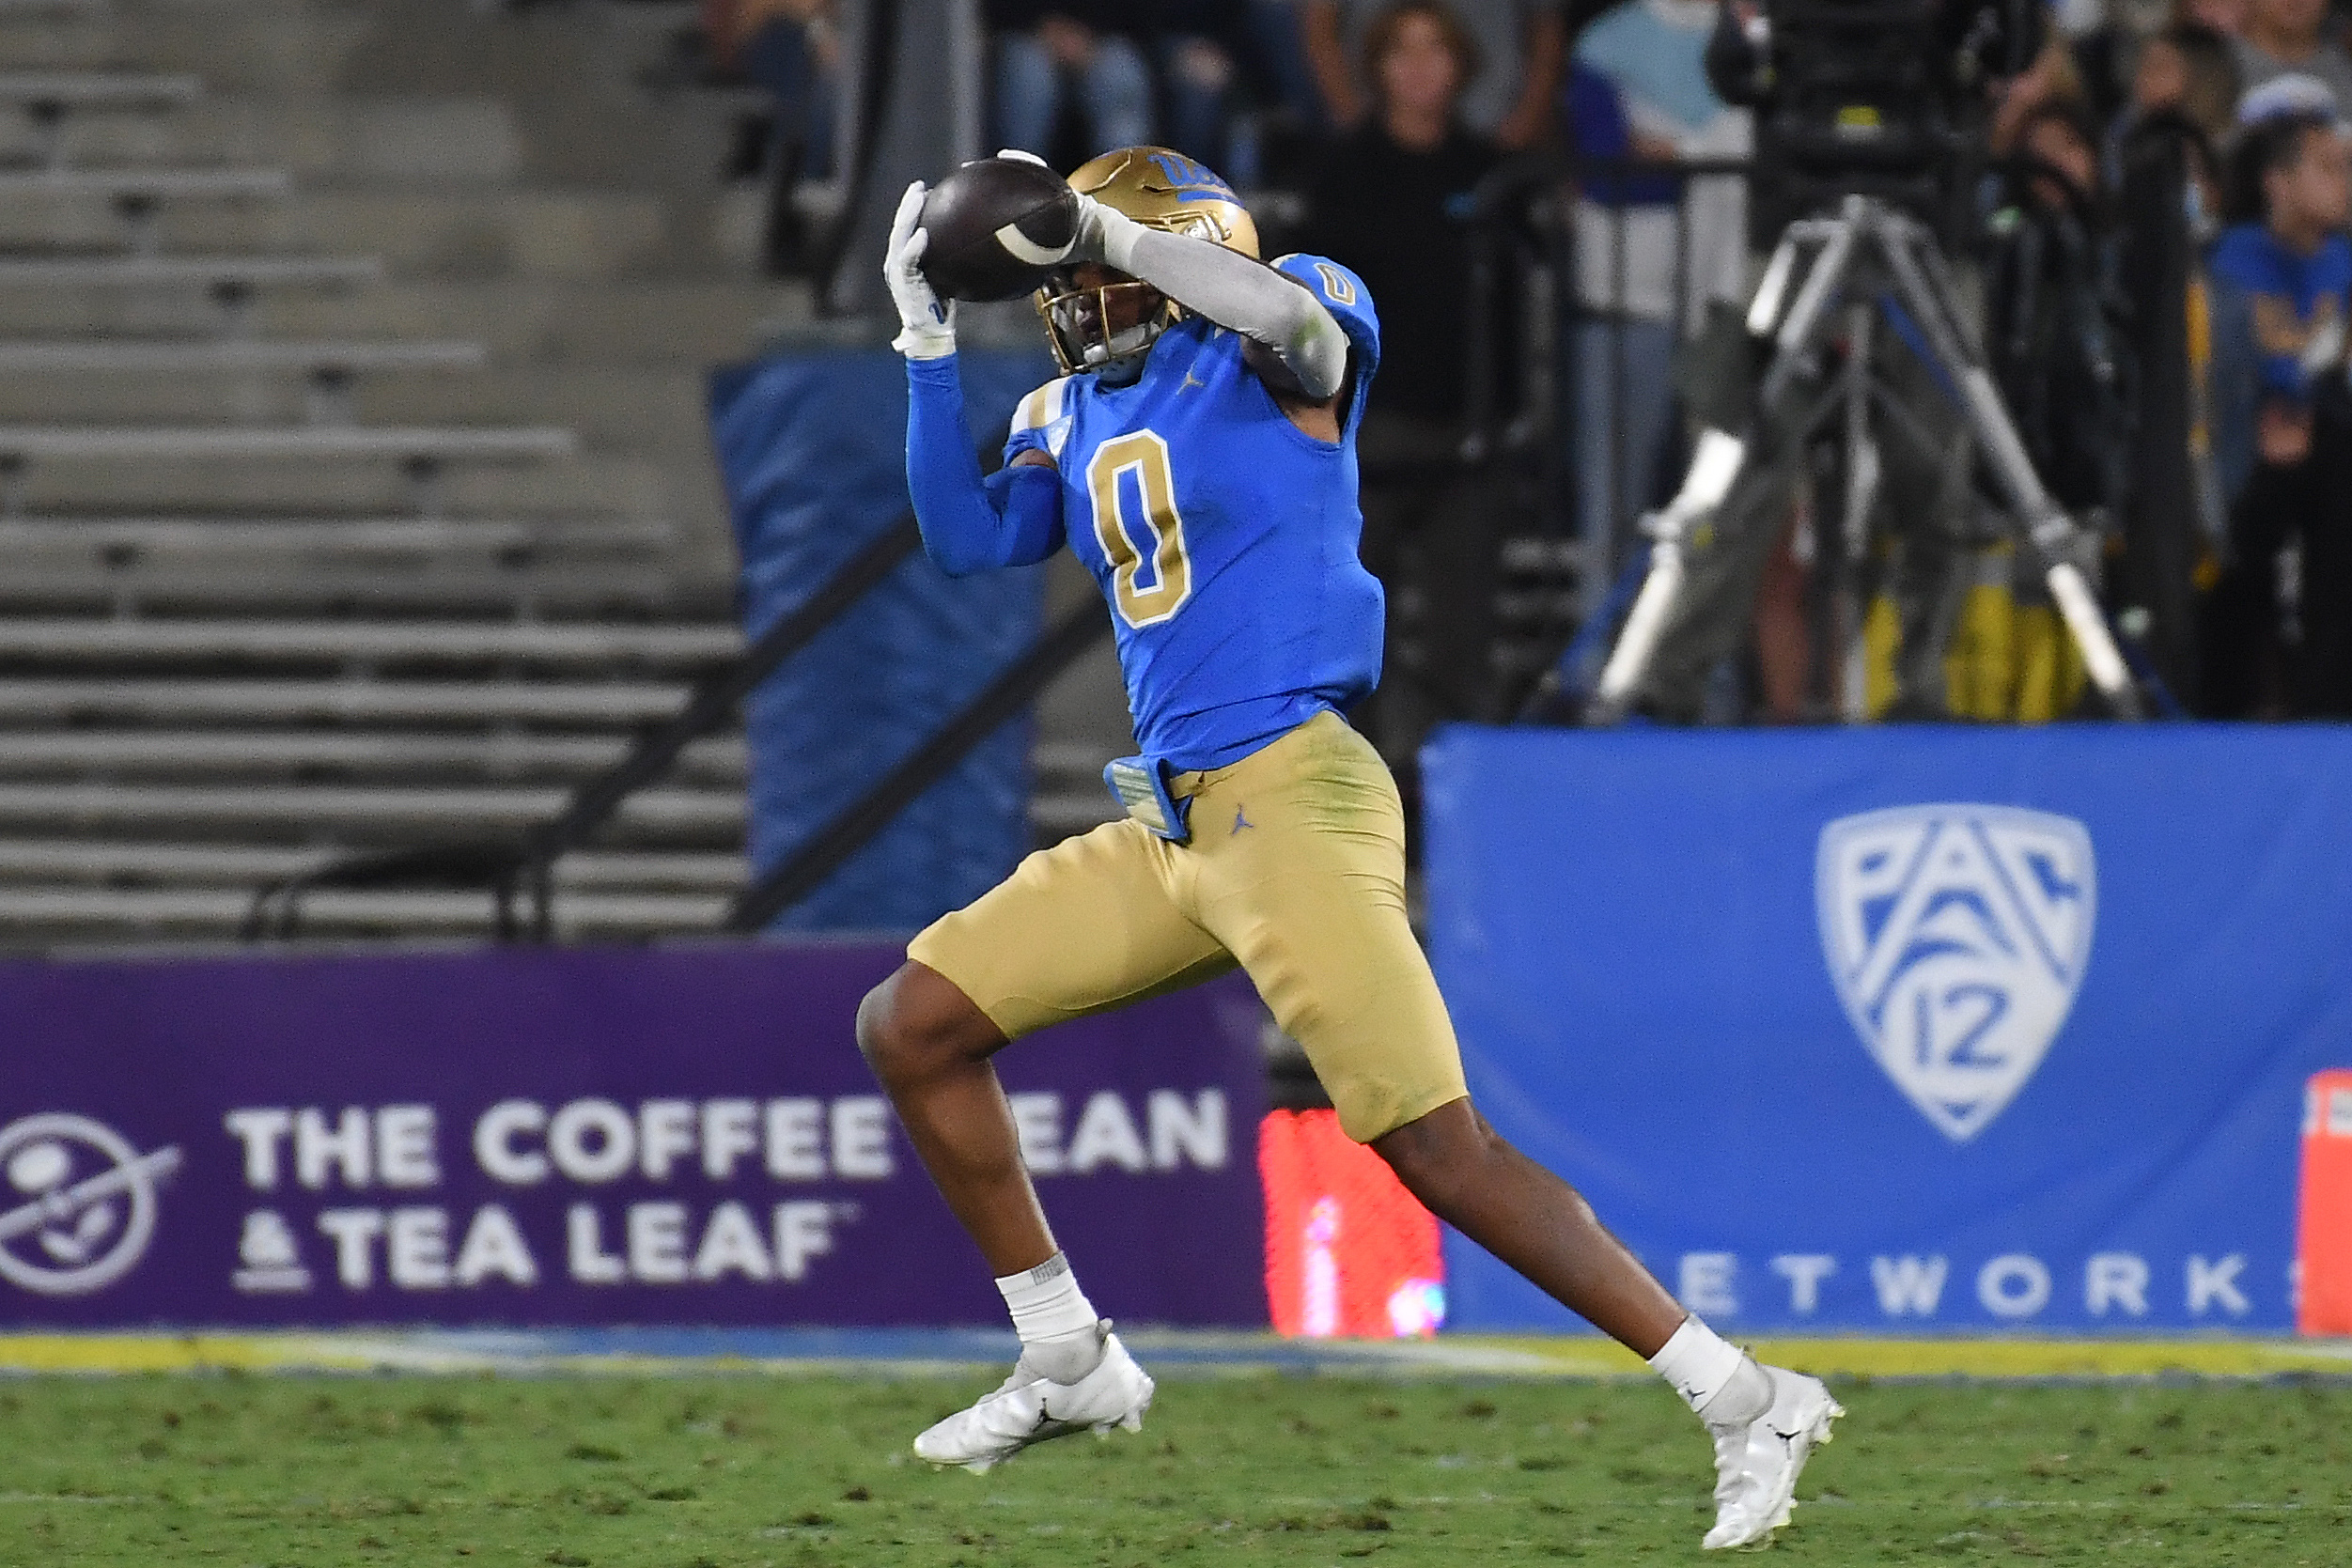 UCLA Can Join The Big Ten, But There May Be A Price